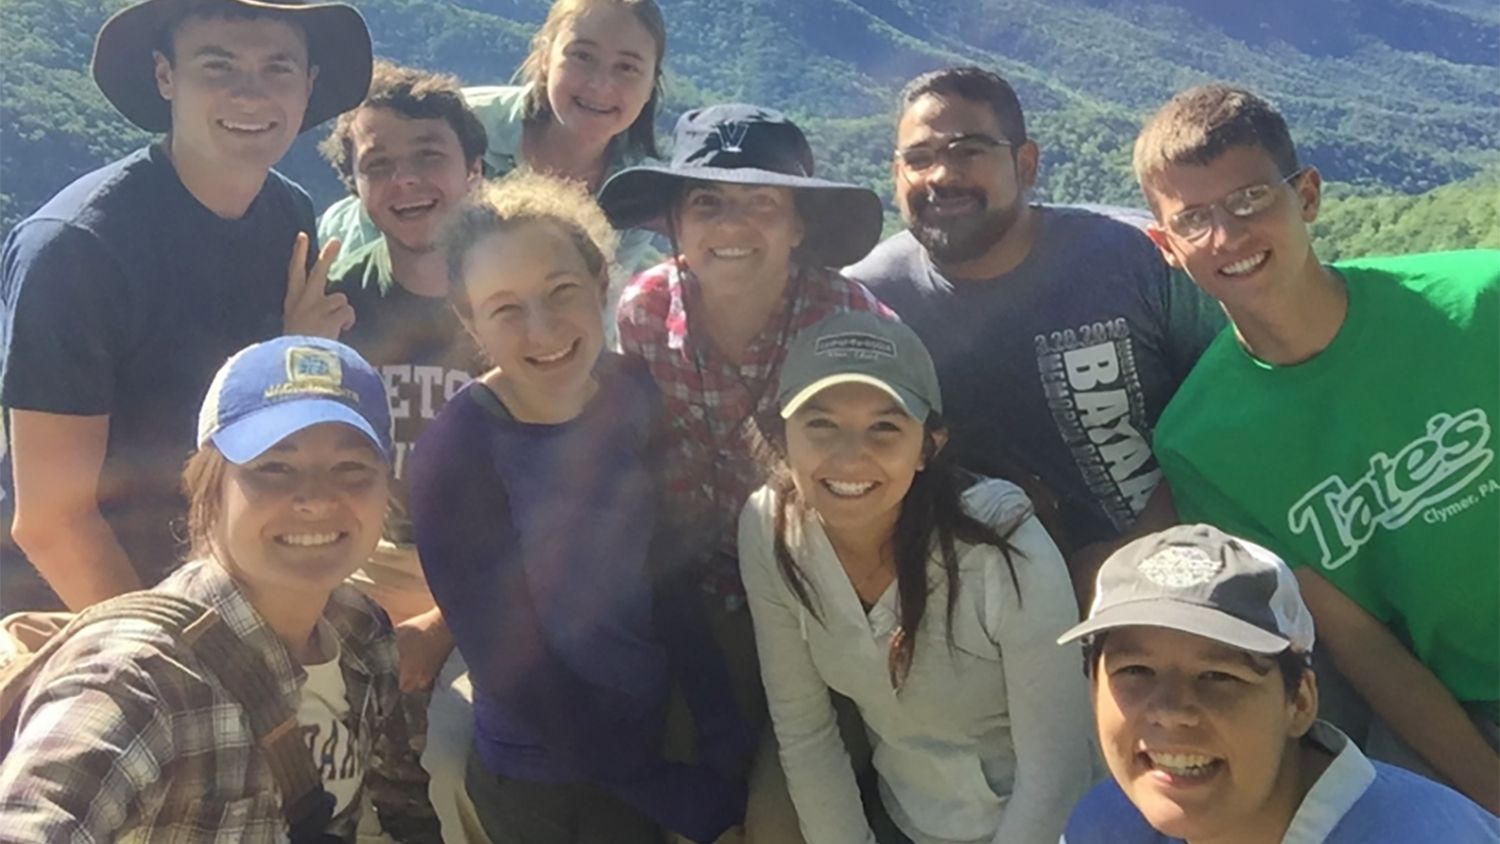 Group of 10 smiling students on a mountainside.